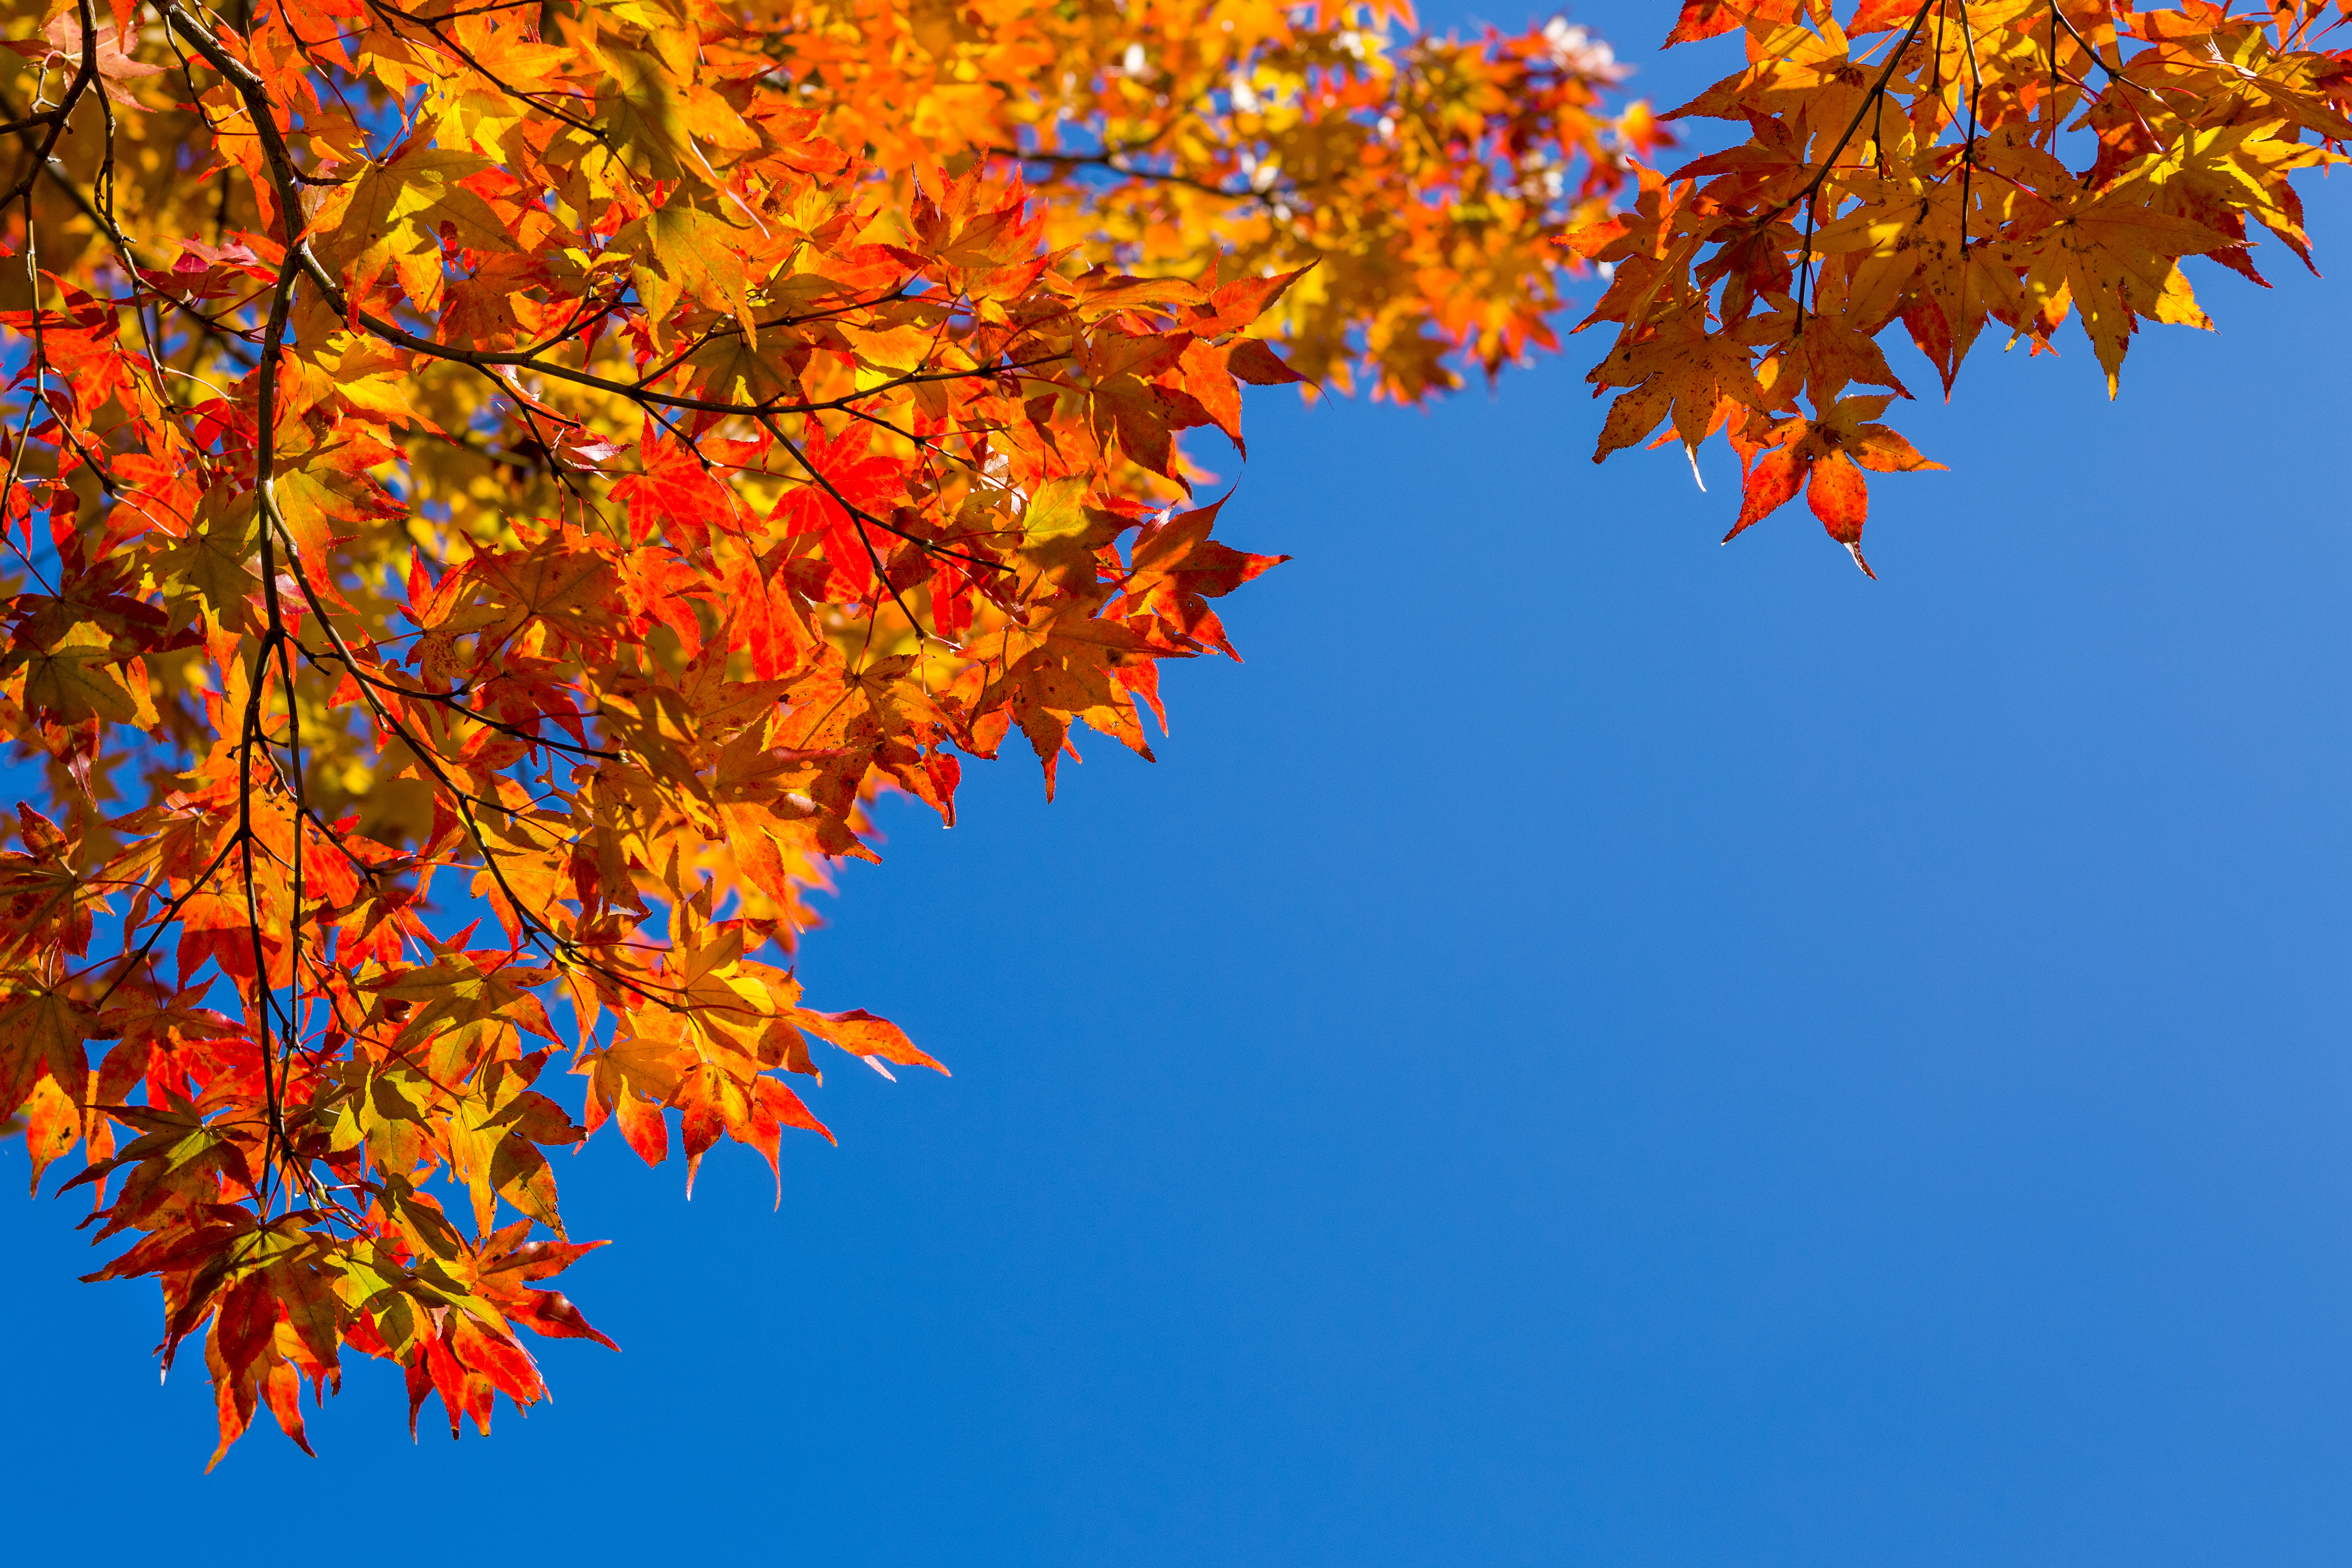 Blue skies and autumn leaves